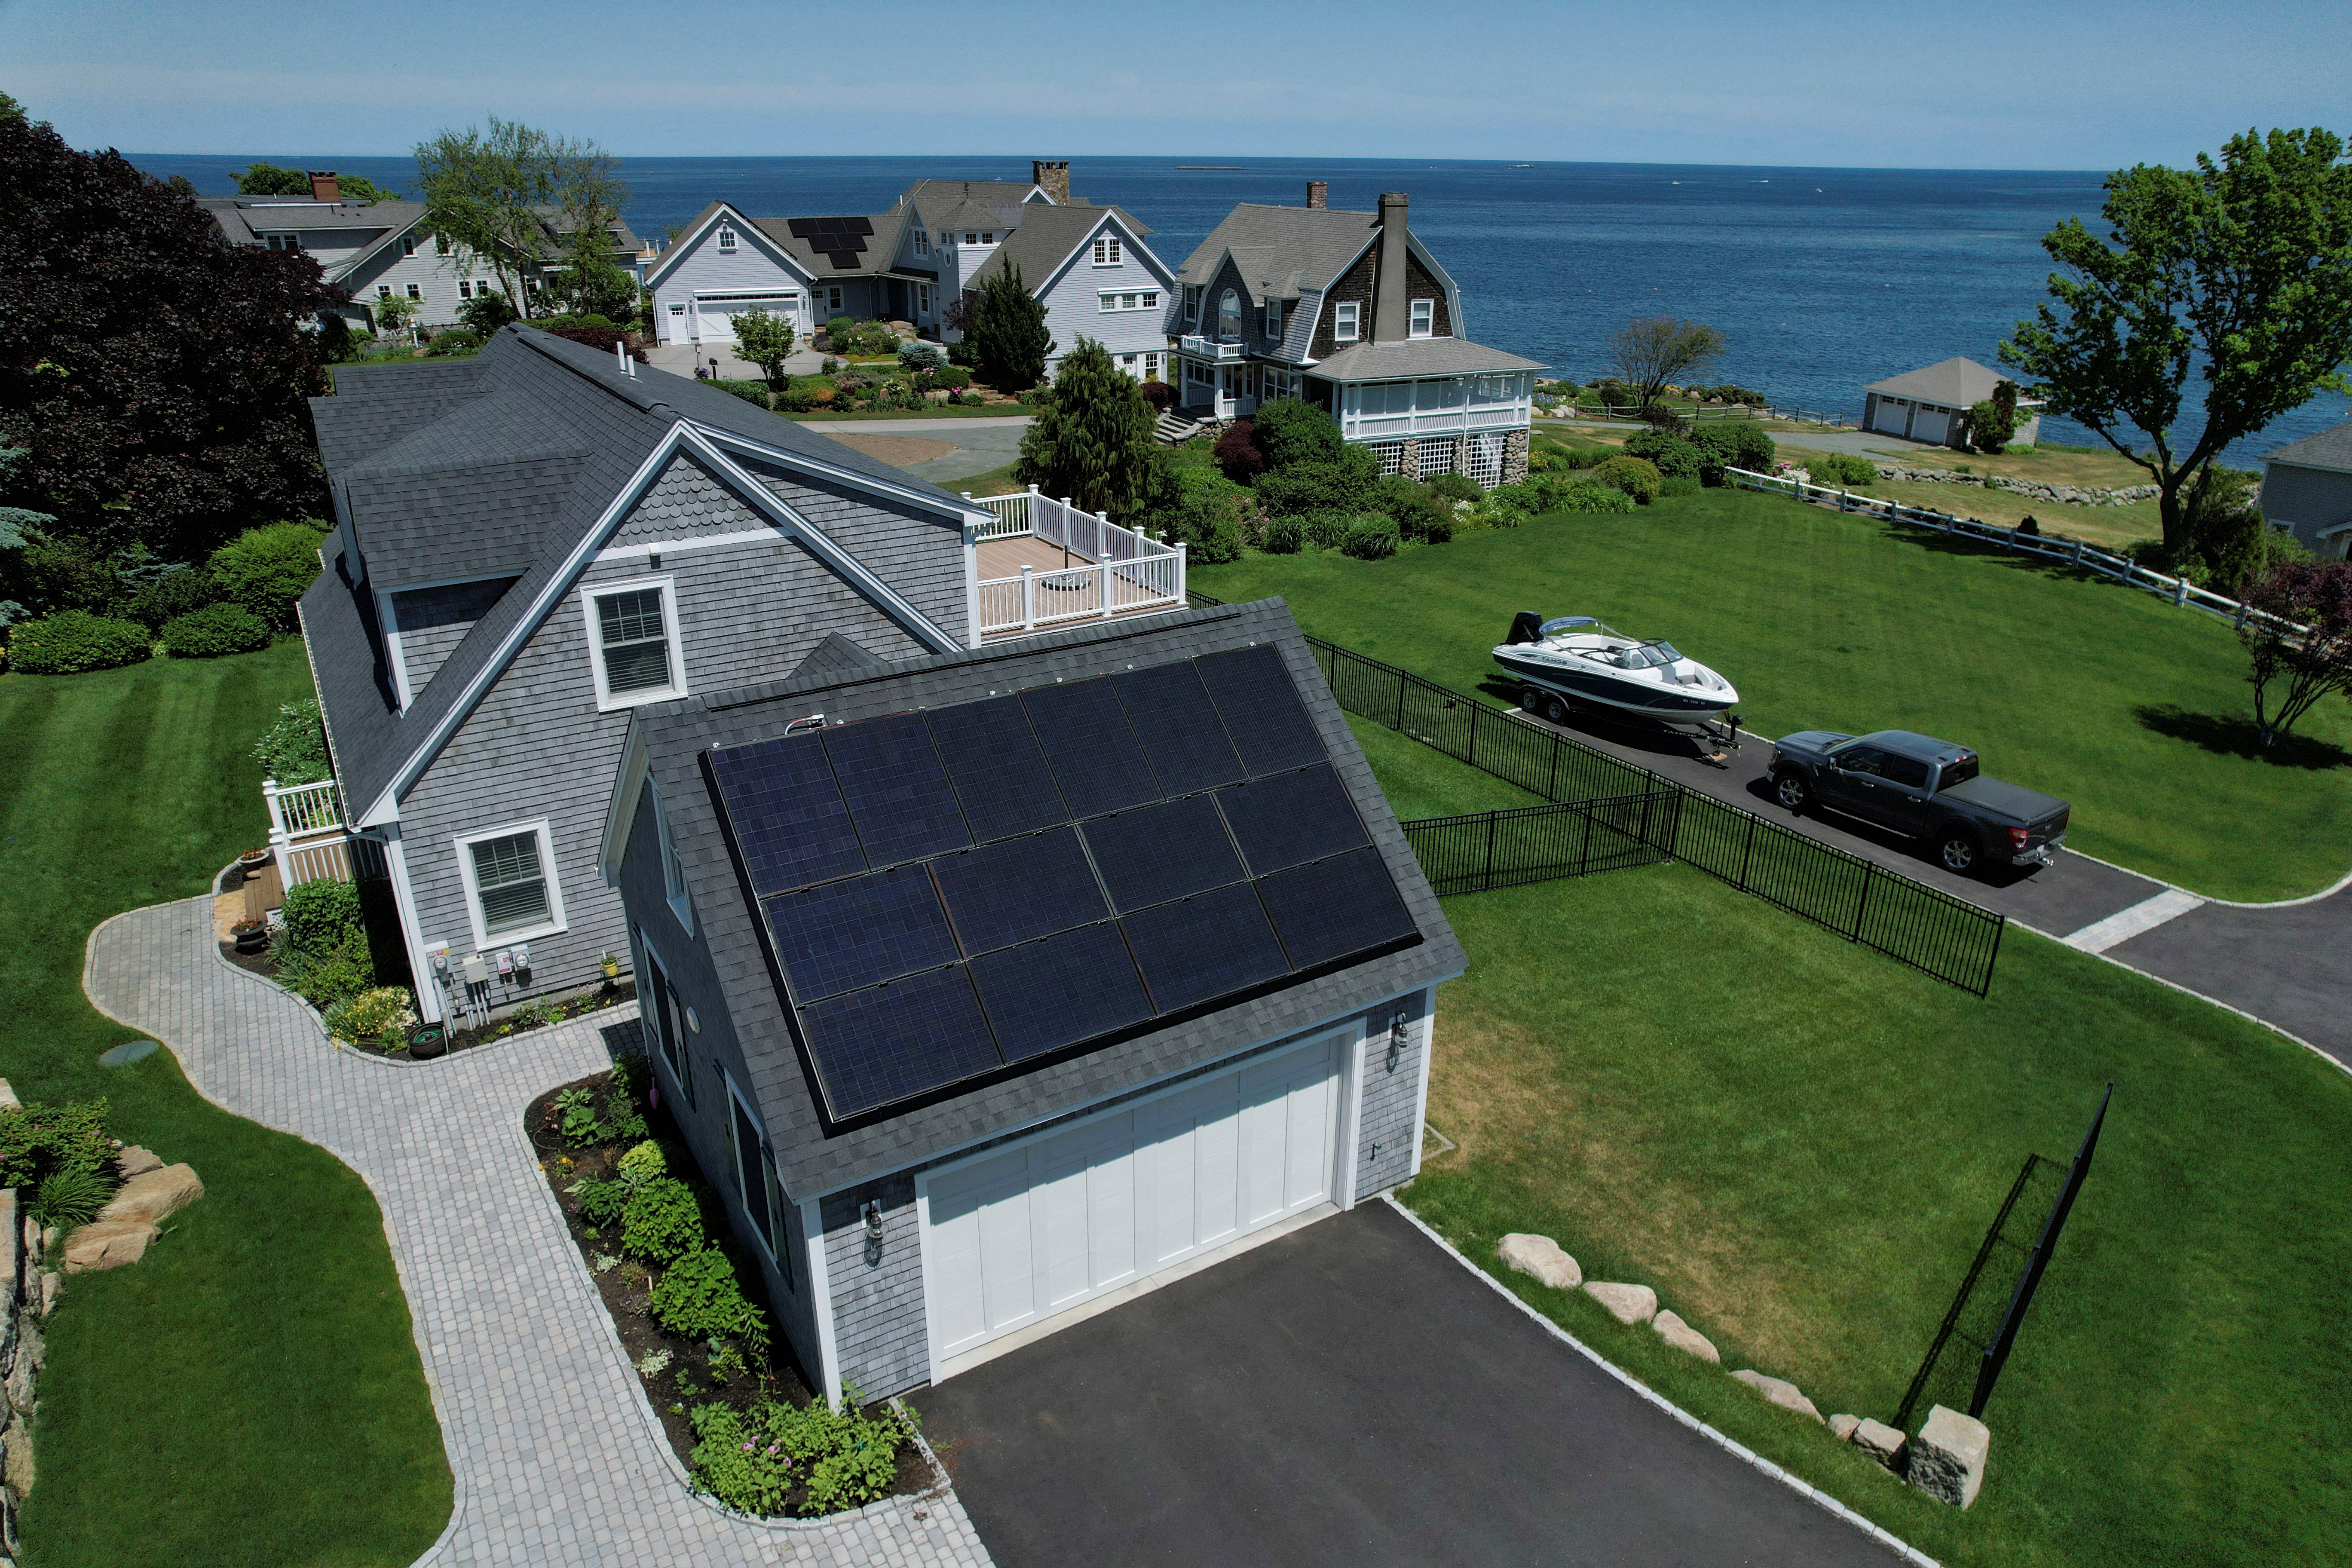 Solar panels create electricity on the roof of a house in Rockport